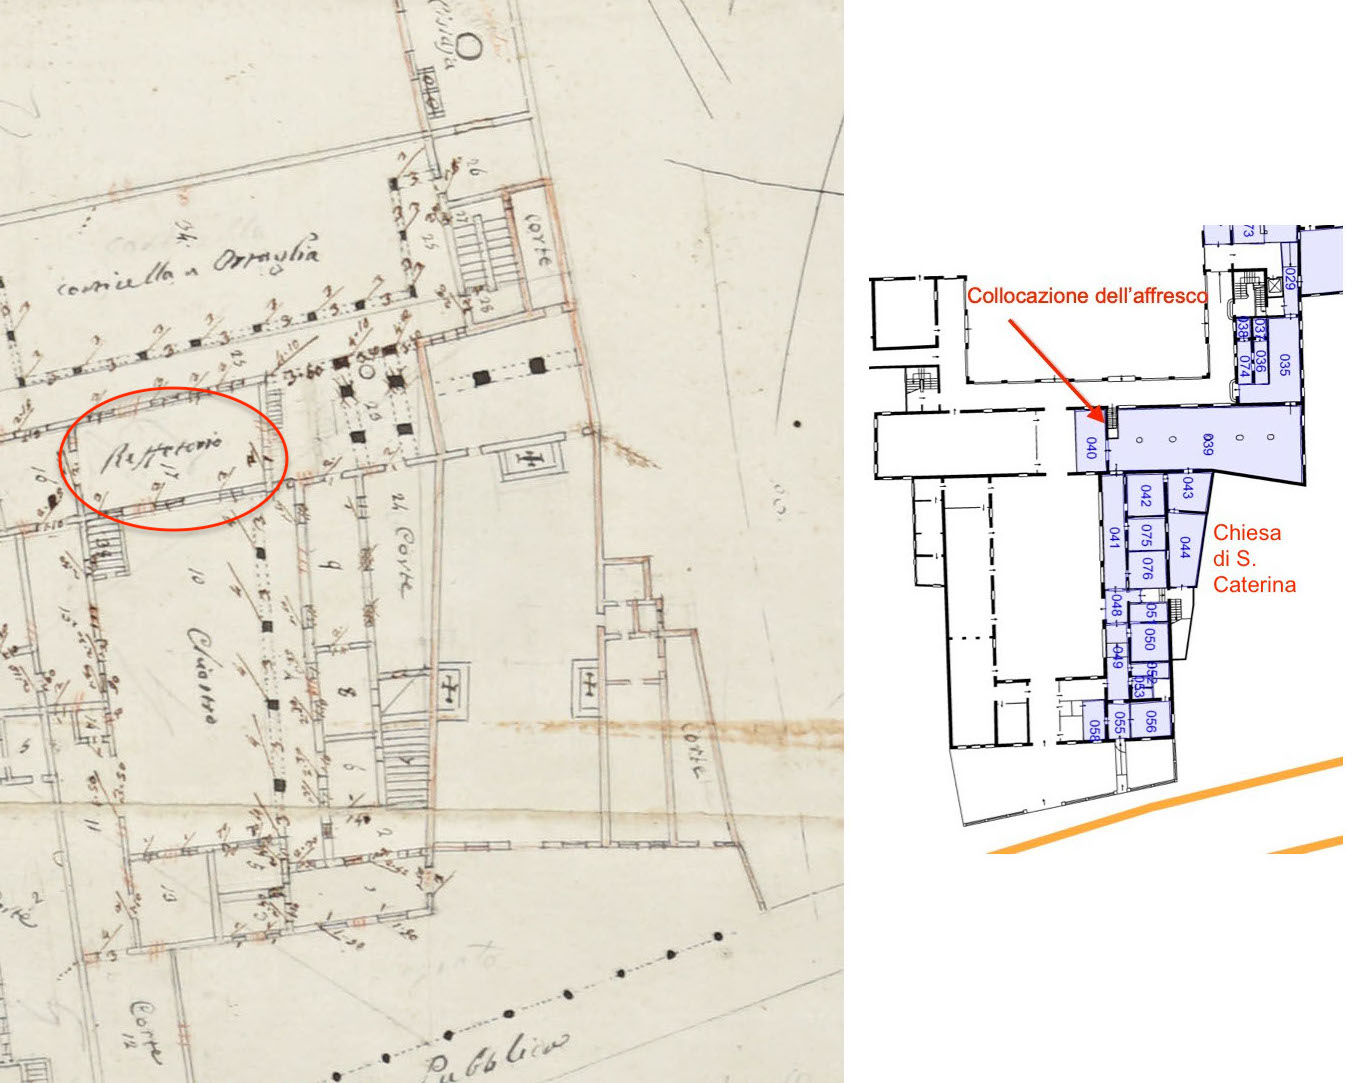 Plan of the rooms of Santa Caterina in a nineteenth-century survey (ASPd, Archivio Pivetta, b. 76, fasc. 1359) and today's equivalent